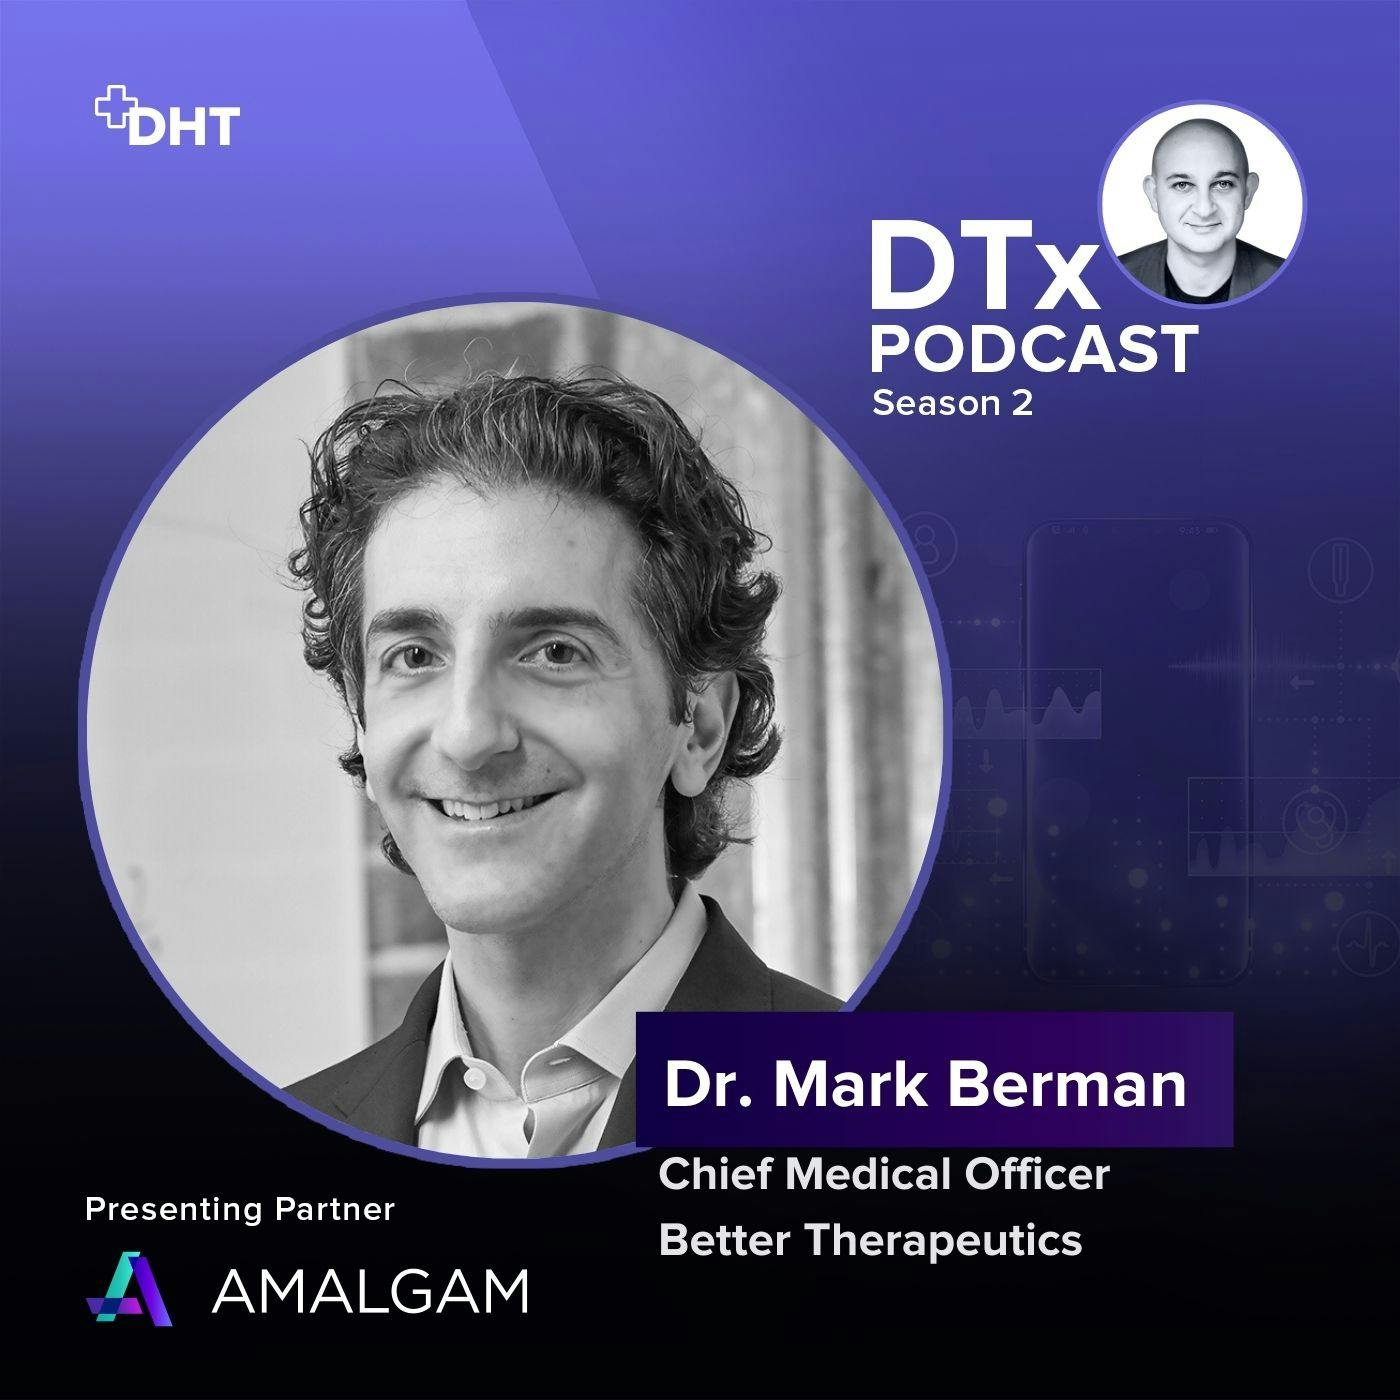 Ep31: Treating Disease Progression with DTx: Dr. Mark Berman Shares Insights on Innovative Prescription Digital Therapeutics